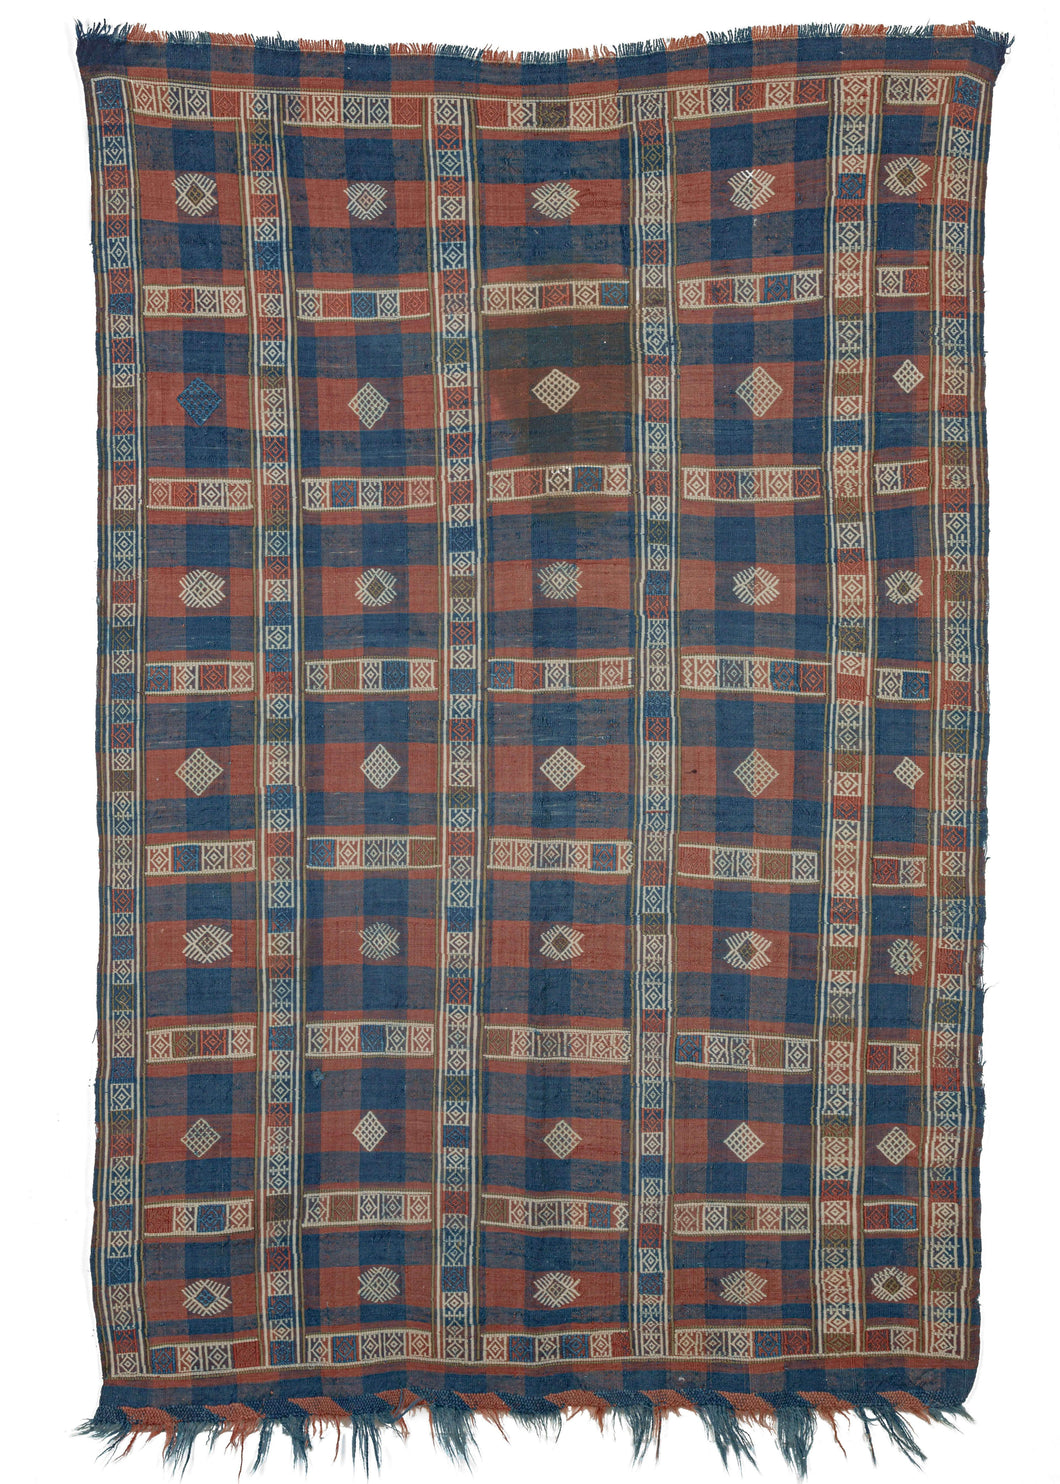 Antique Caucasian soumak Verneh kilim featuring a blue and brown plaid weave with ivory soumak embroidery in a grid formation. Small symbols and shapes in the center of the squares add visual interest. This kilim was probably made for use as a cover or a sofreh. 